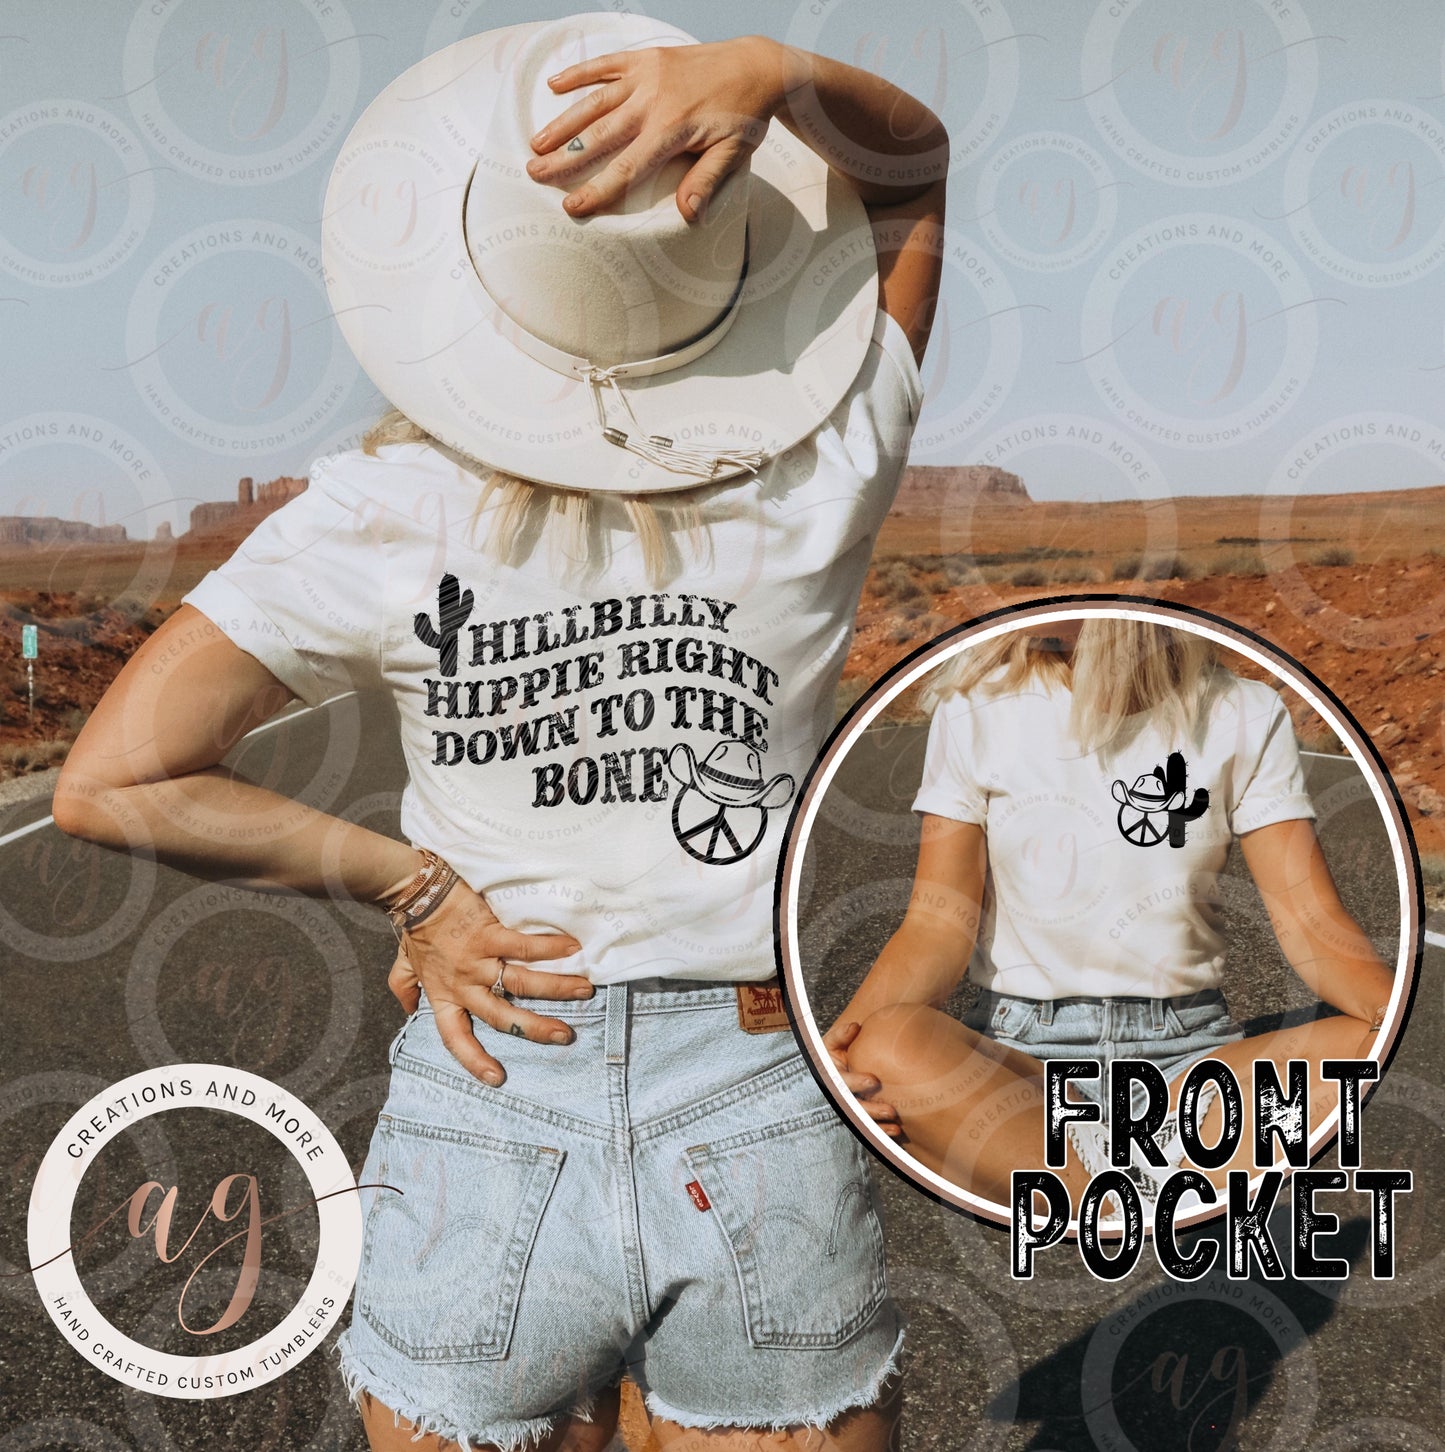 Hillbilly Hippie Right Down to the Bone Single Color Pocket Set Png